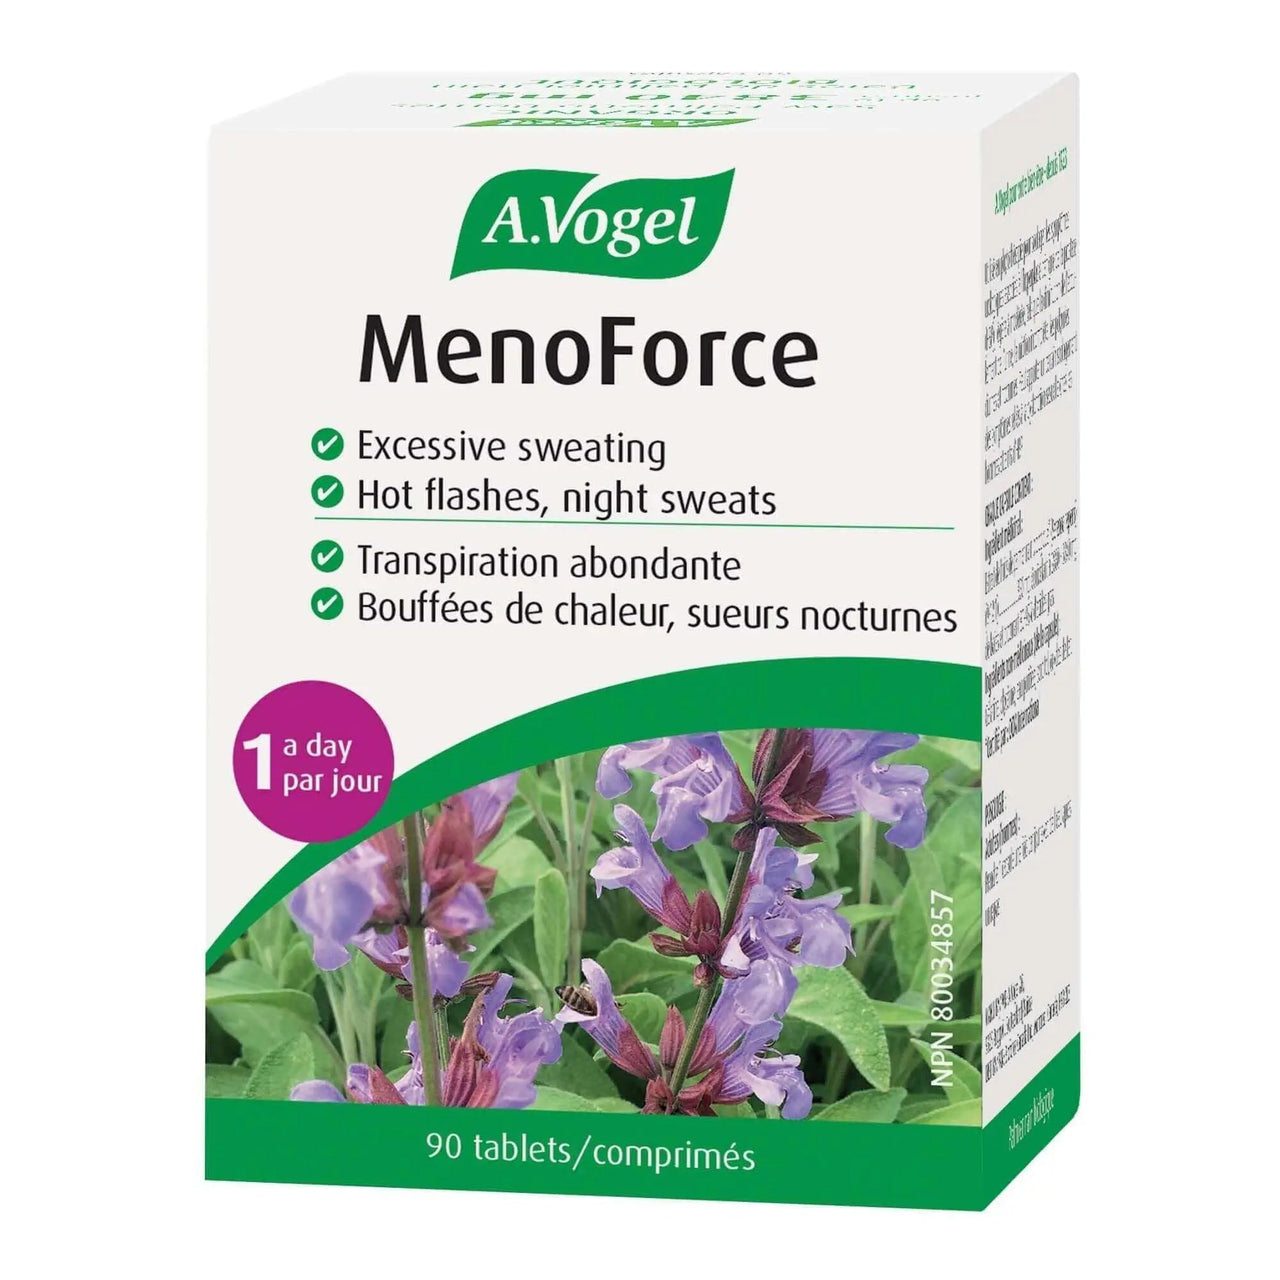 A. Vogel MenoForce Menopause Supplement For Hot Flashes 90 Tablets - Nutrition Plus